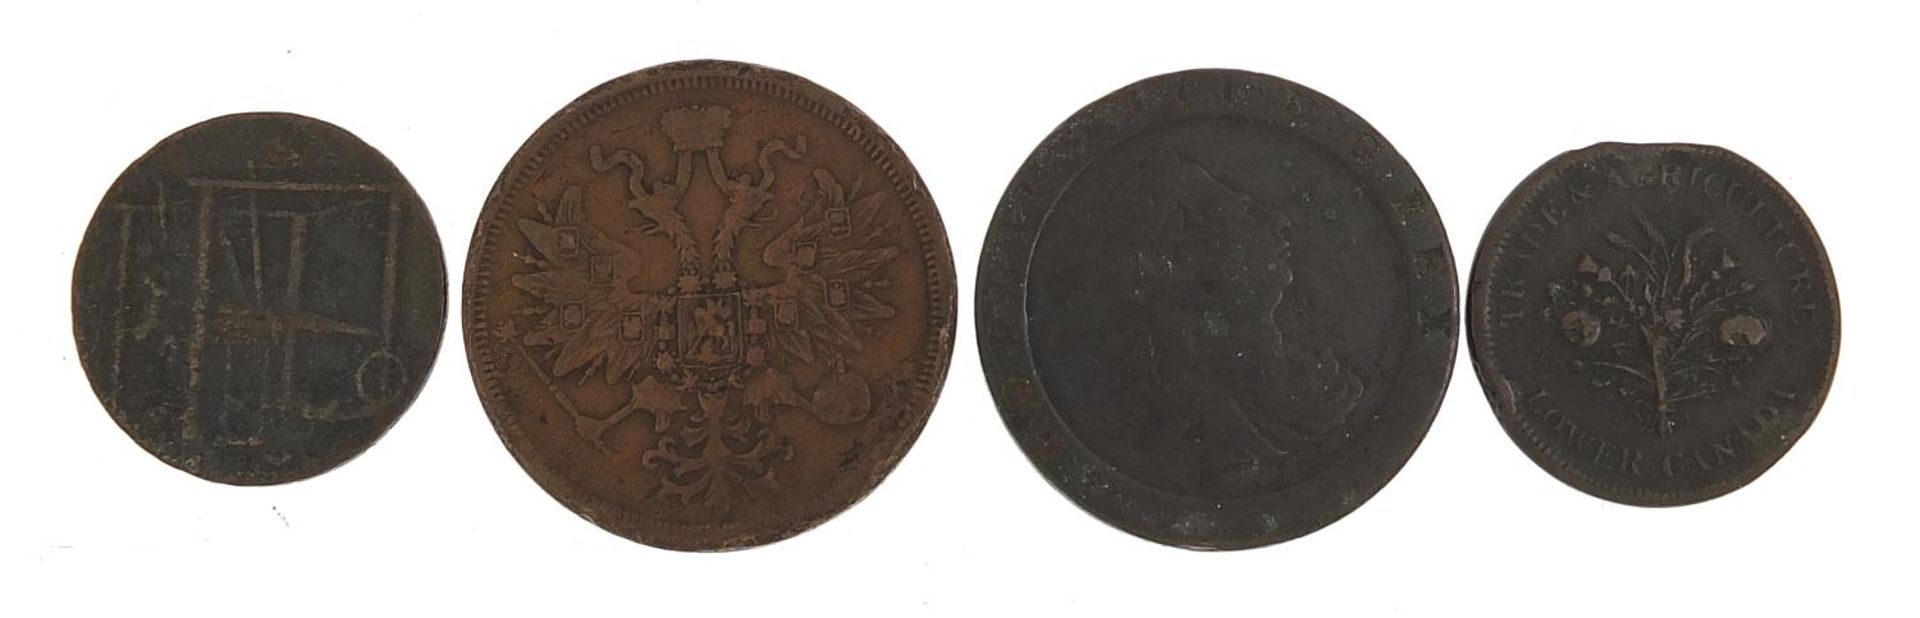 Antique coinage including a 1797 halfpenny - Image 2 of 2